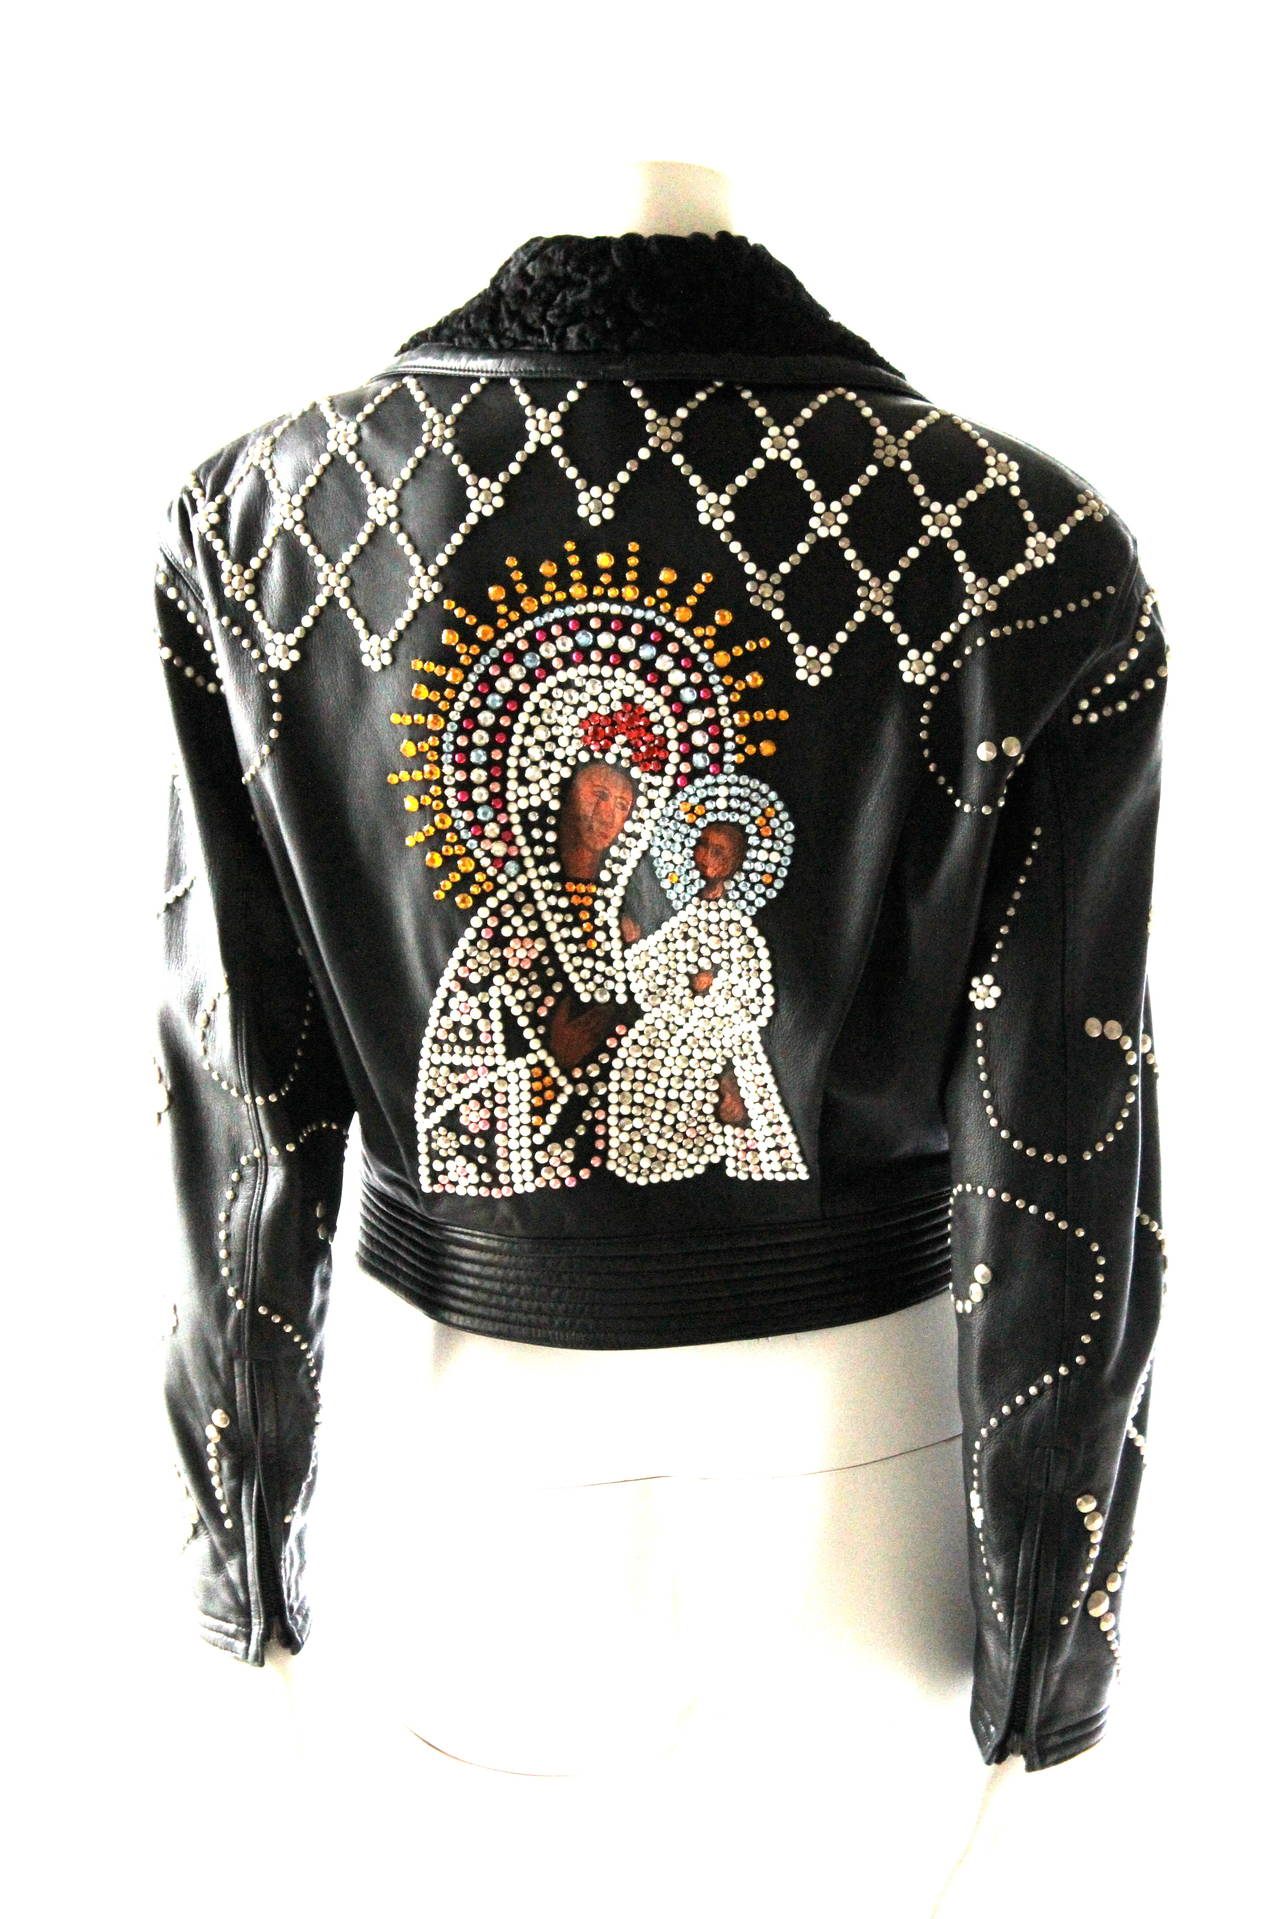 Iconic Gianni Versace Jewelled Madonna and Child Leather Runway Jacket

Couture Collection 1991

Hand Painted details for Madonna and Child
Very soft and subtle leather with fur collar

approx size 40